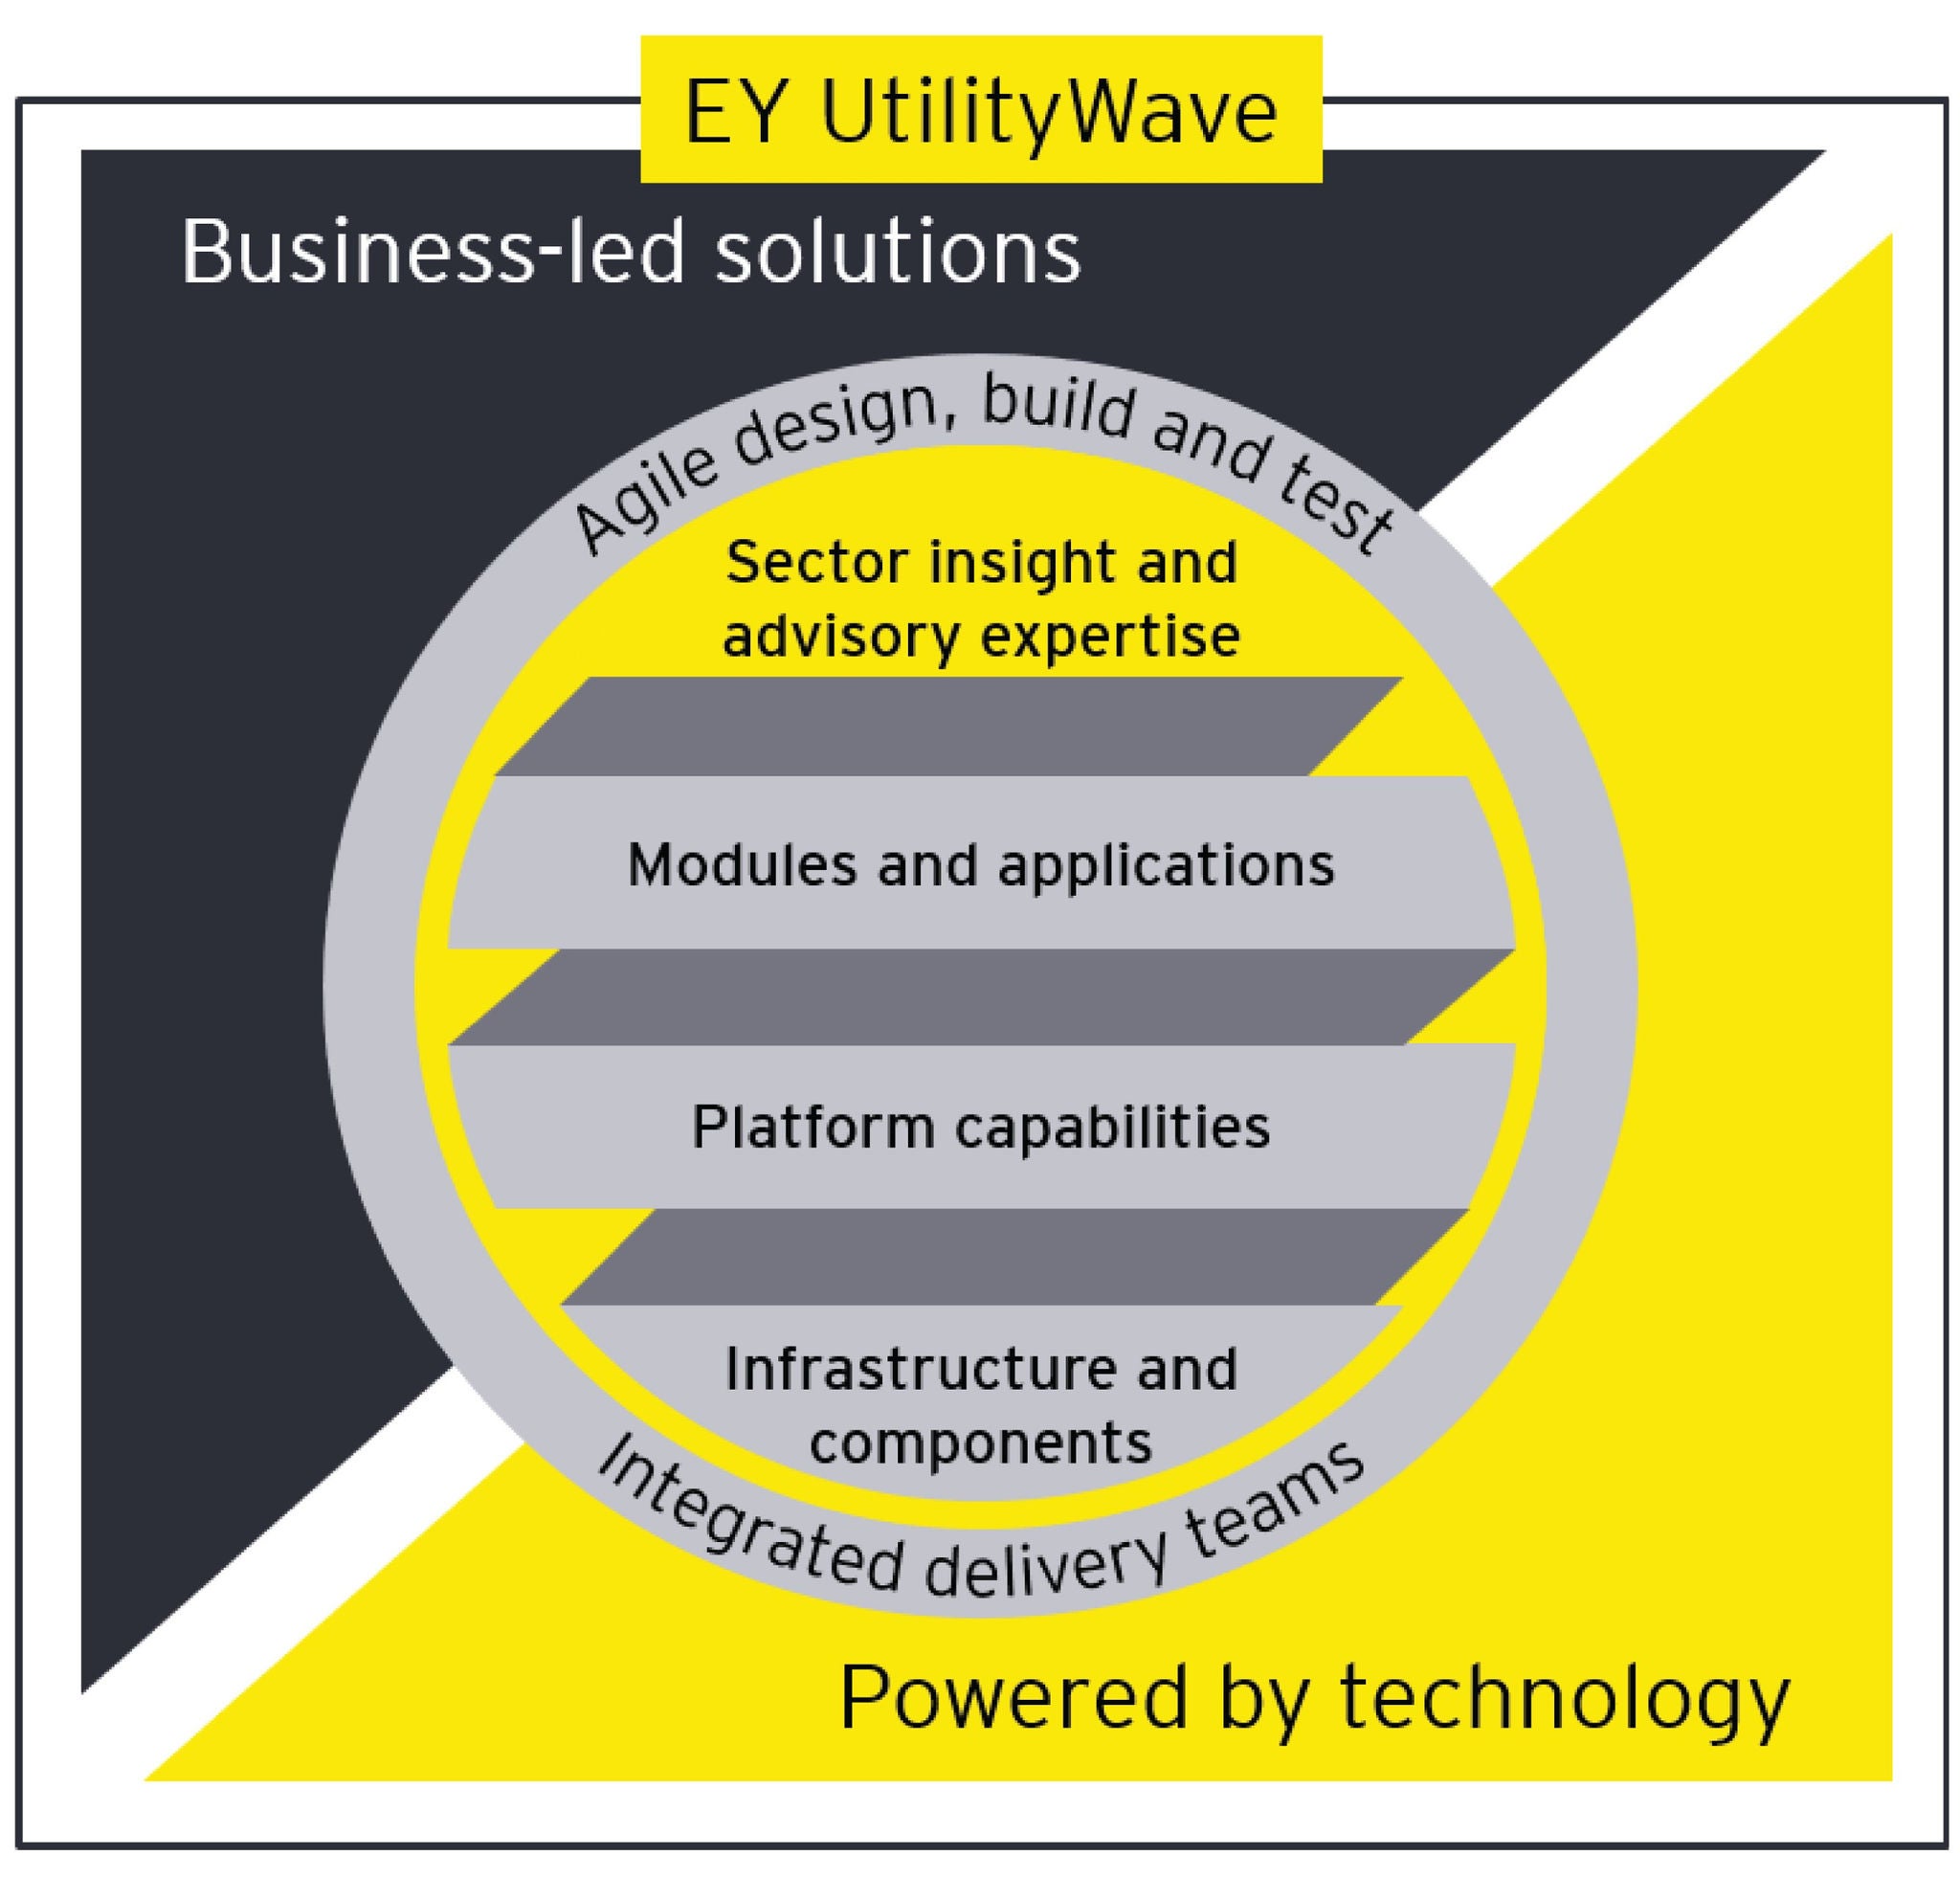 A service that brings the depth of EY know-how underpinned by world-class Microsoft technology